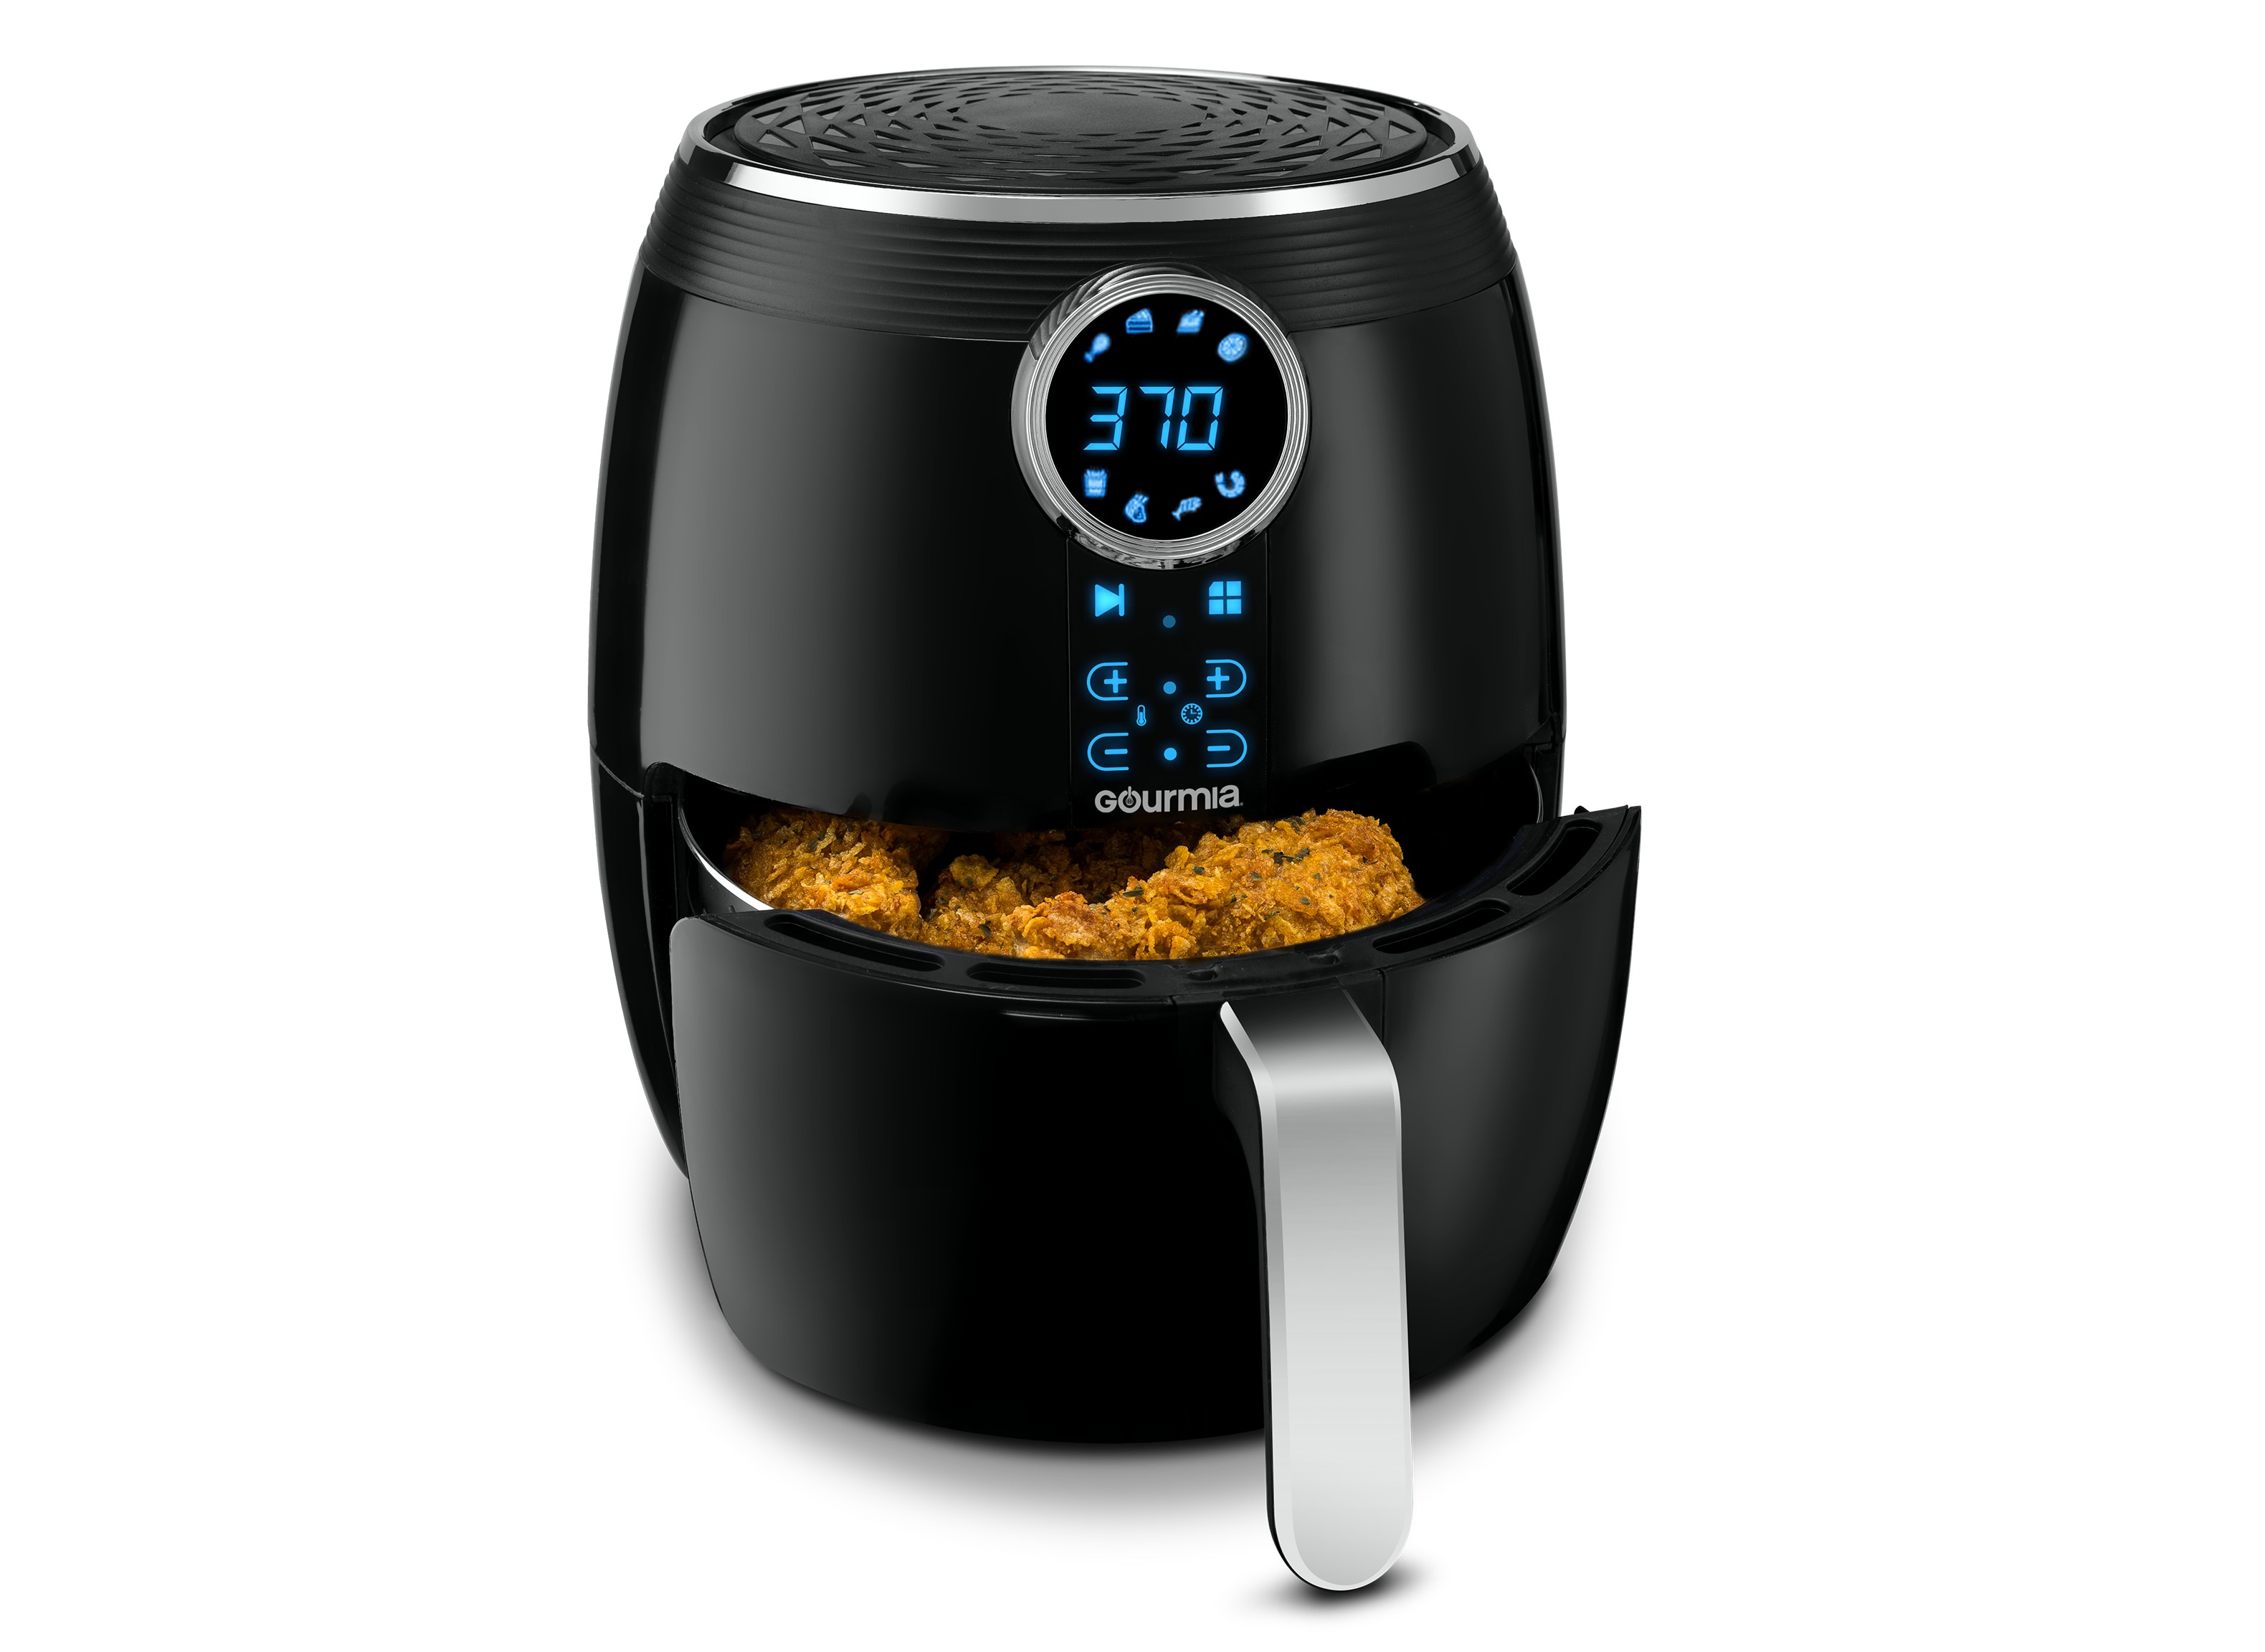 Gourmia Air Fryer Review - Is The Gourmia Right For You?